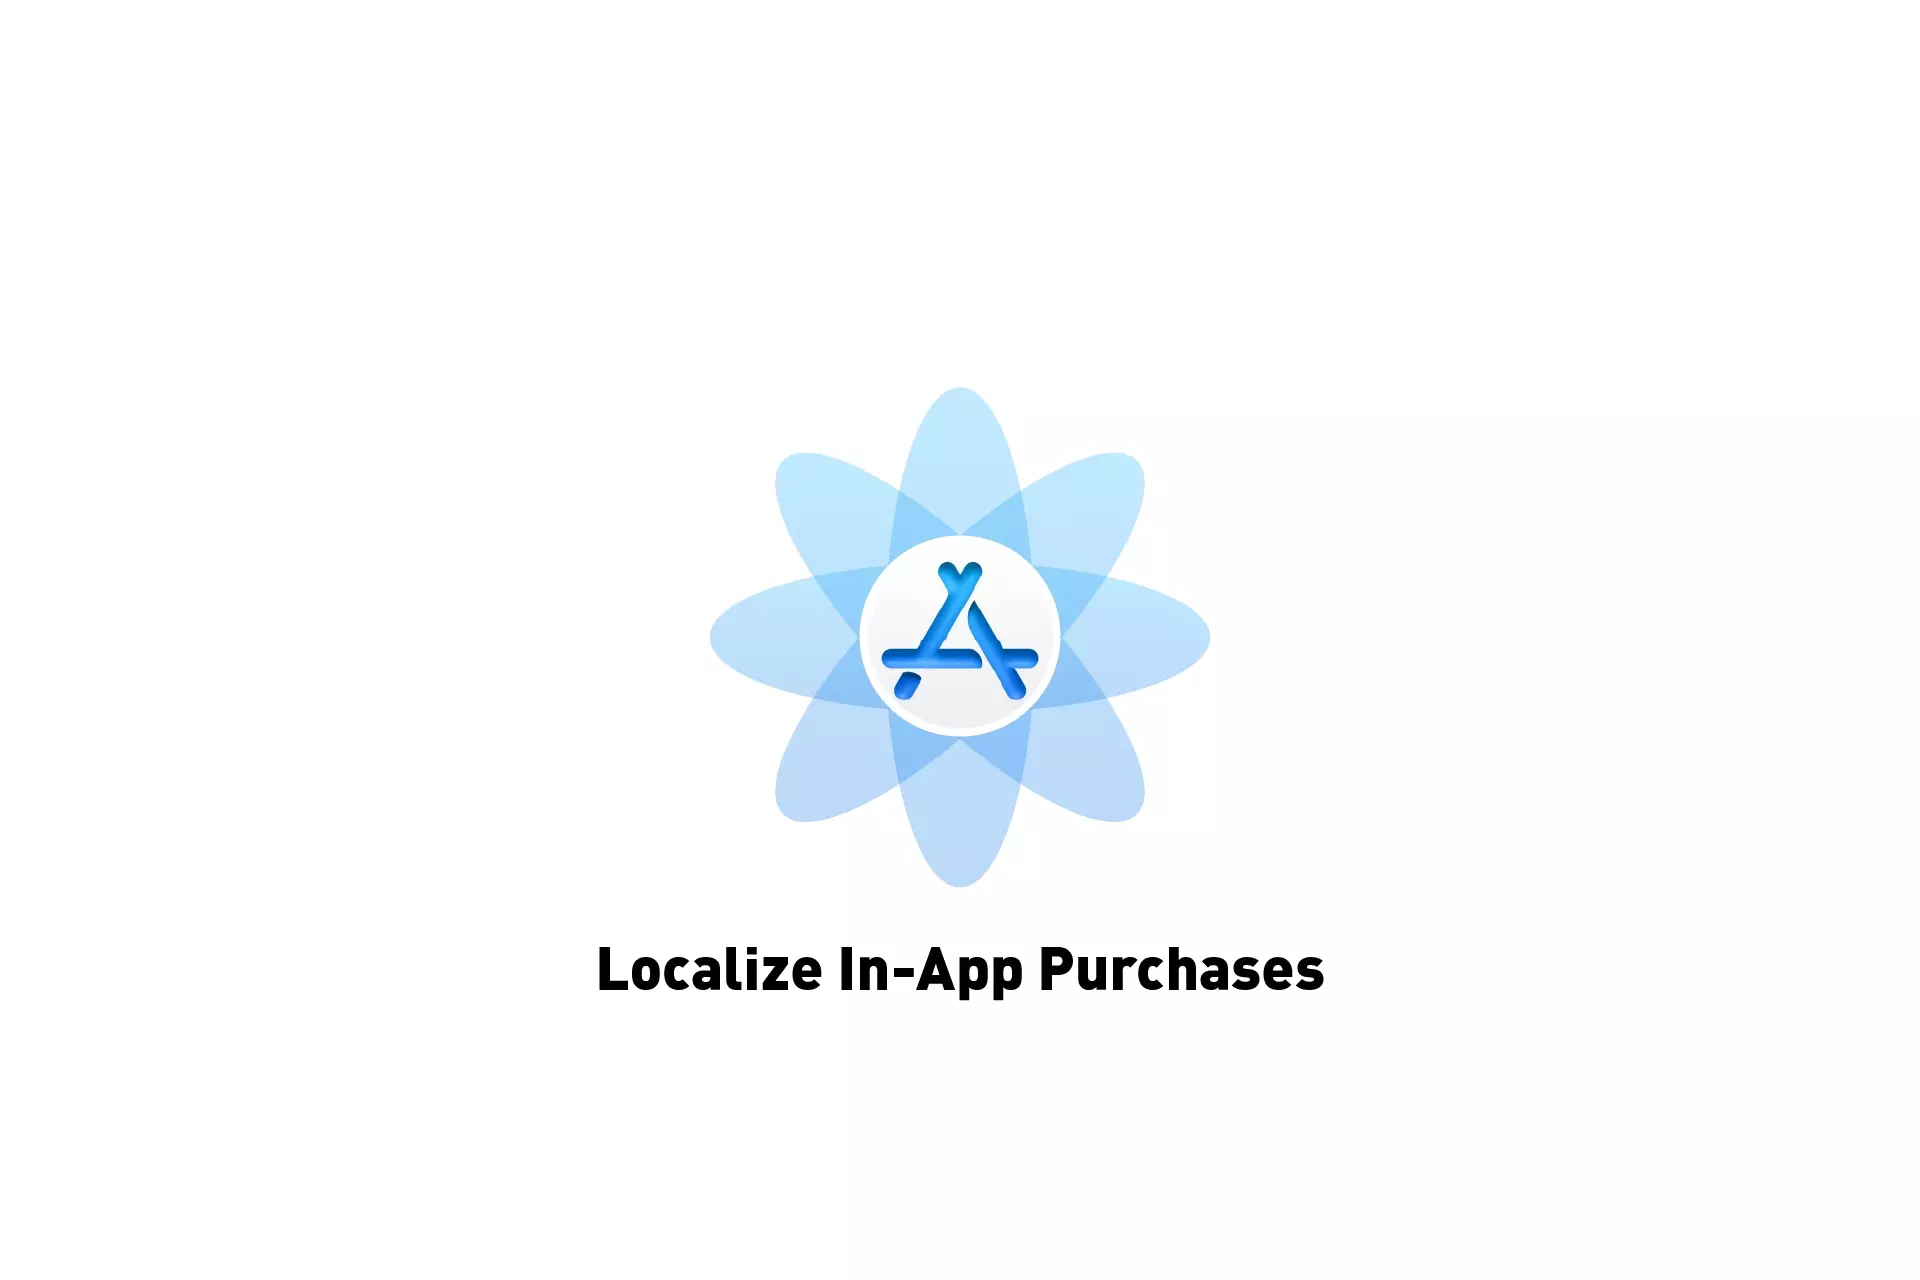 A flower that represents App Store Connect with the text "Localize In-App Purchases" beneath it.